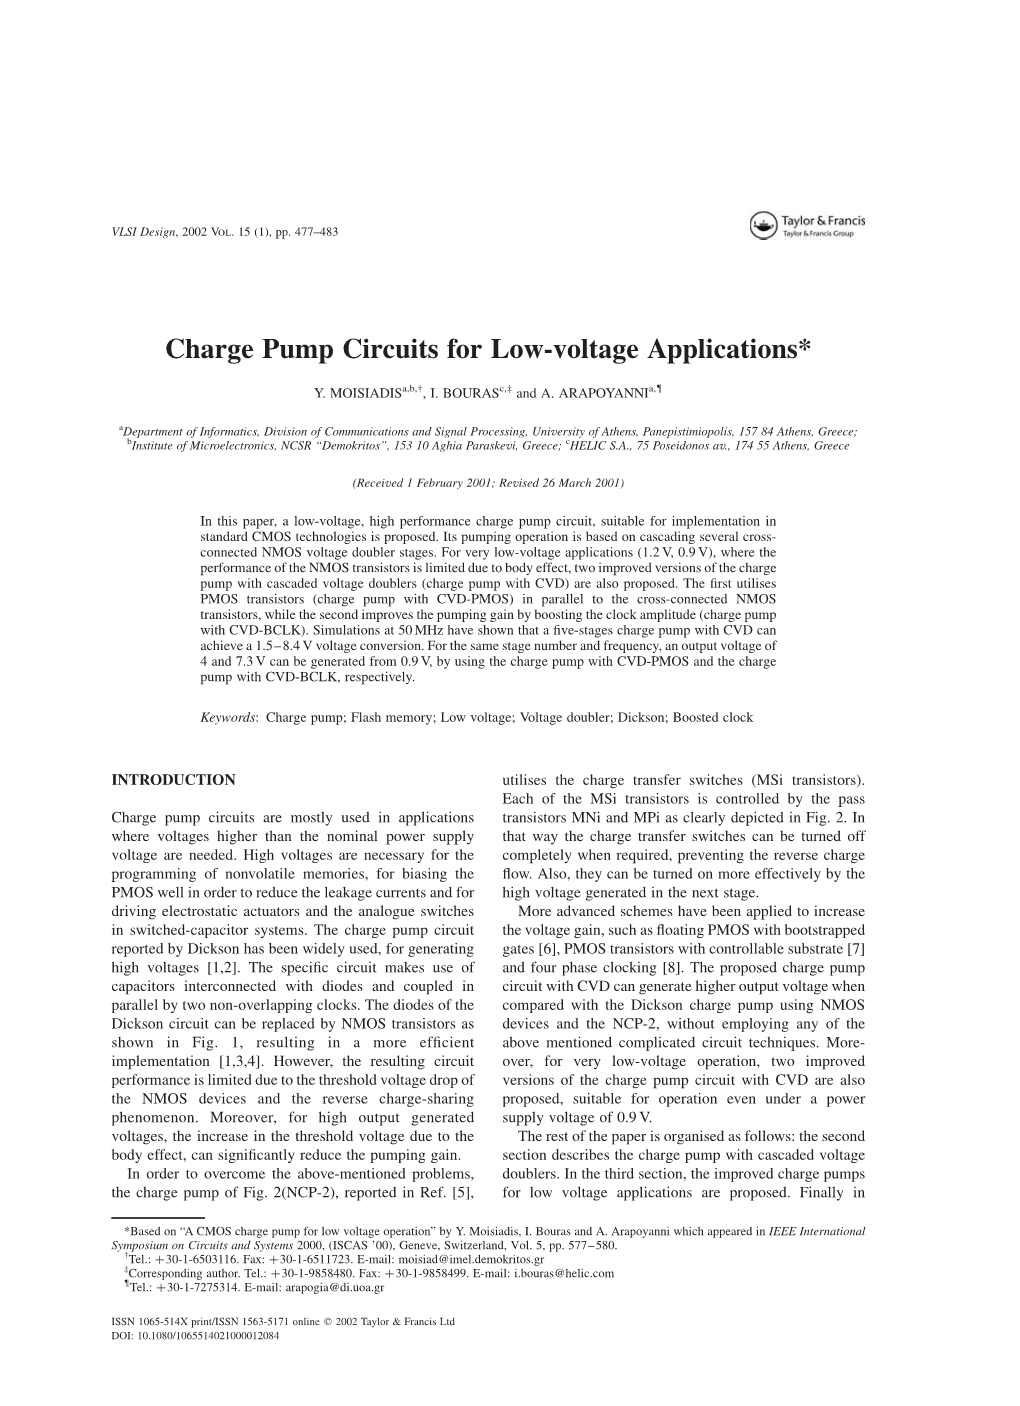 Charge Pump Circuits for Low-Voltage Applications*